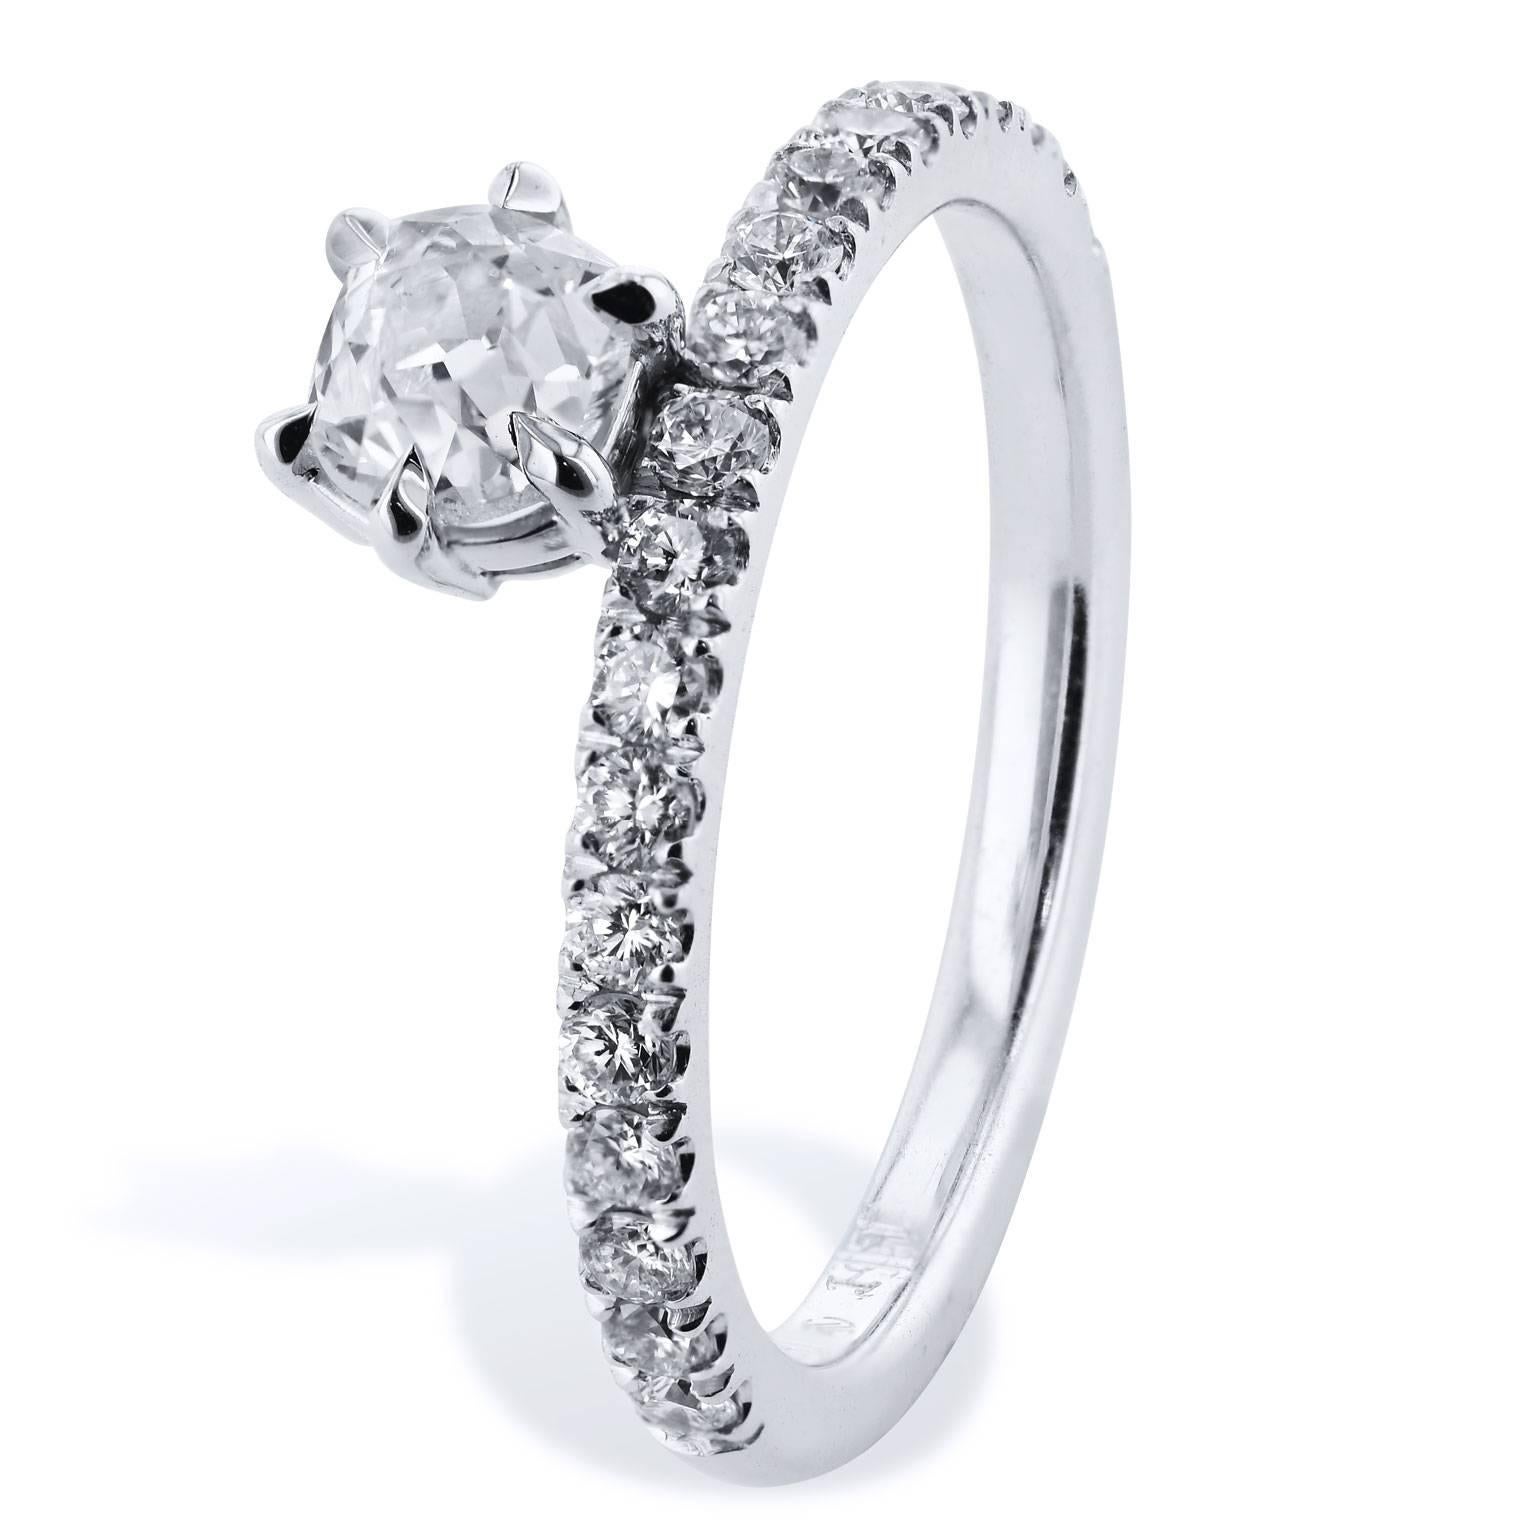 
H&H 0.61 Carat Solitaire Antique Cushion Cut Diamond with Pave Band Ring

This is a handmade, one of a kind ring created by H&H Jewels.  

This beautiful ring features a 0.61 carat Antique Cushion Cut diamond that is set at center with six prongs.